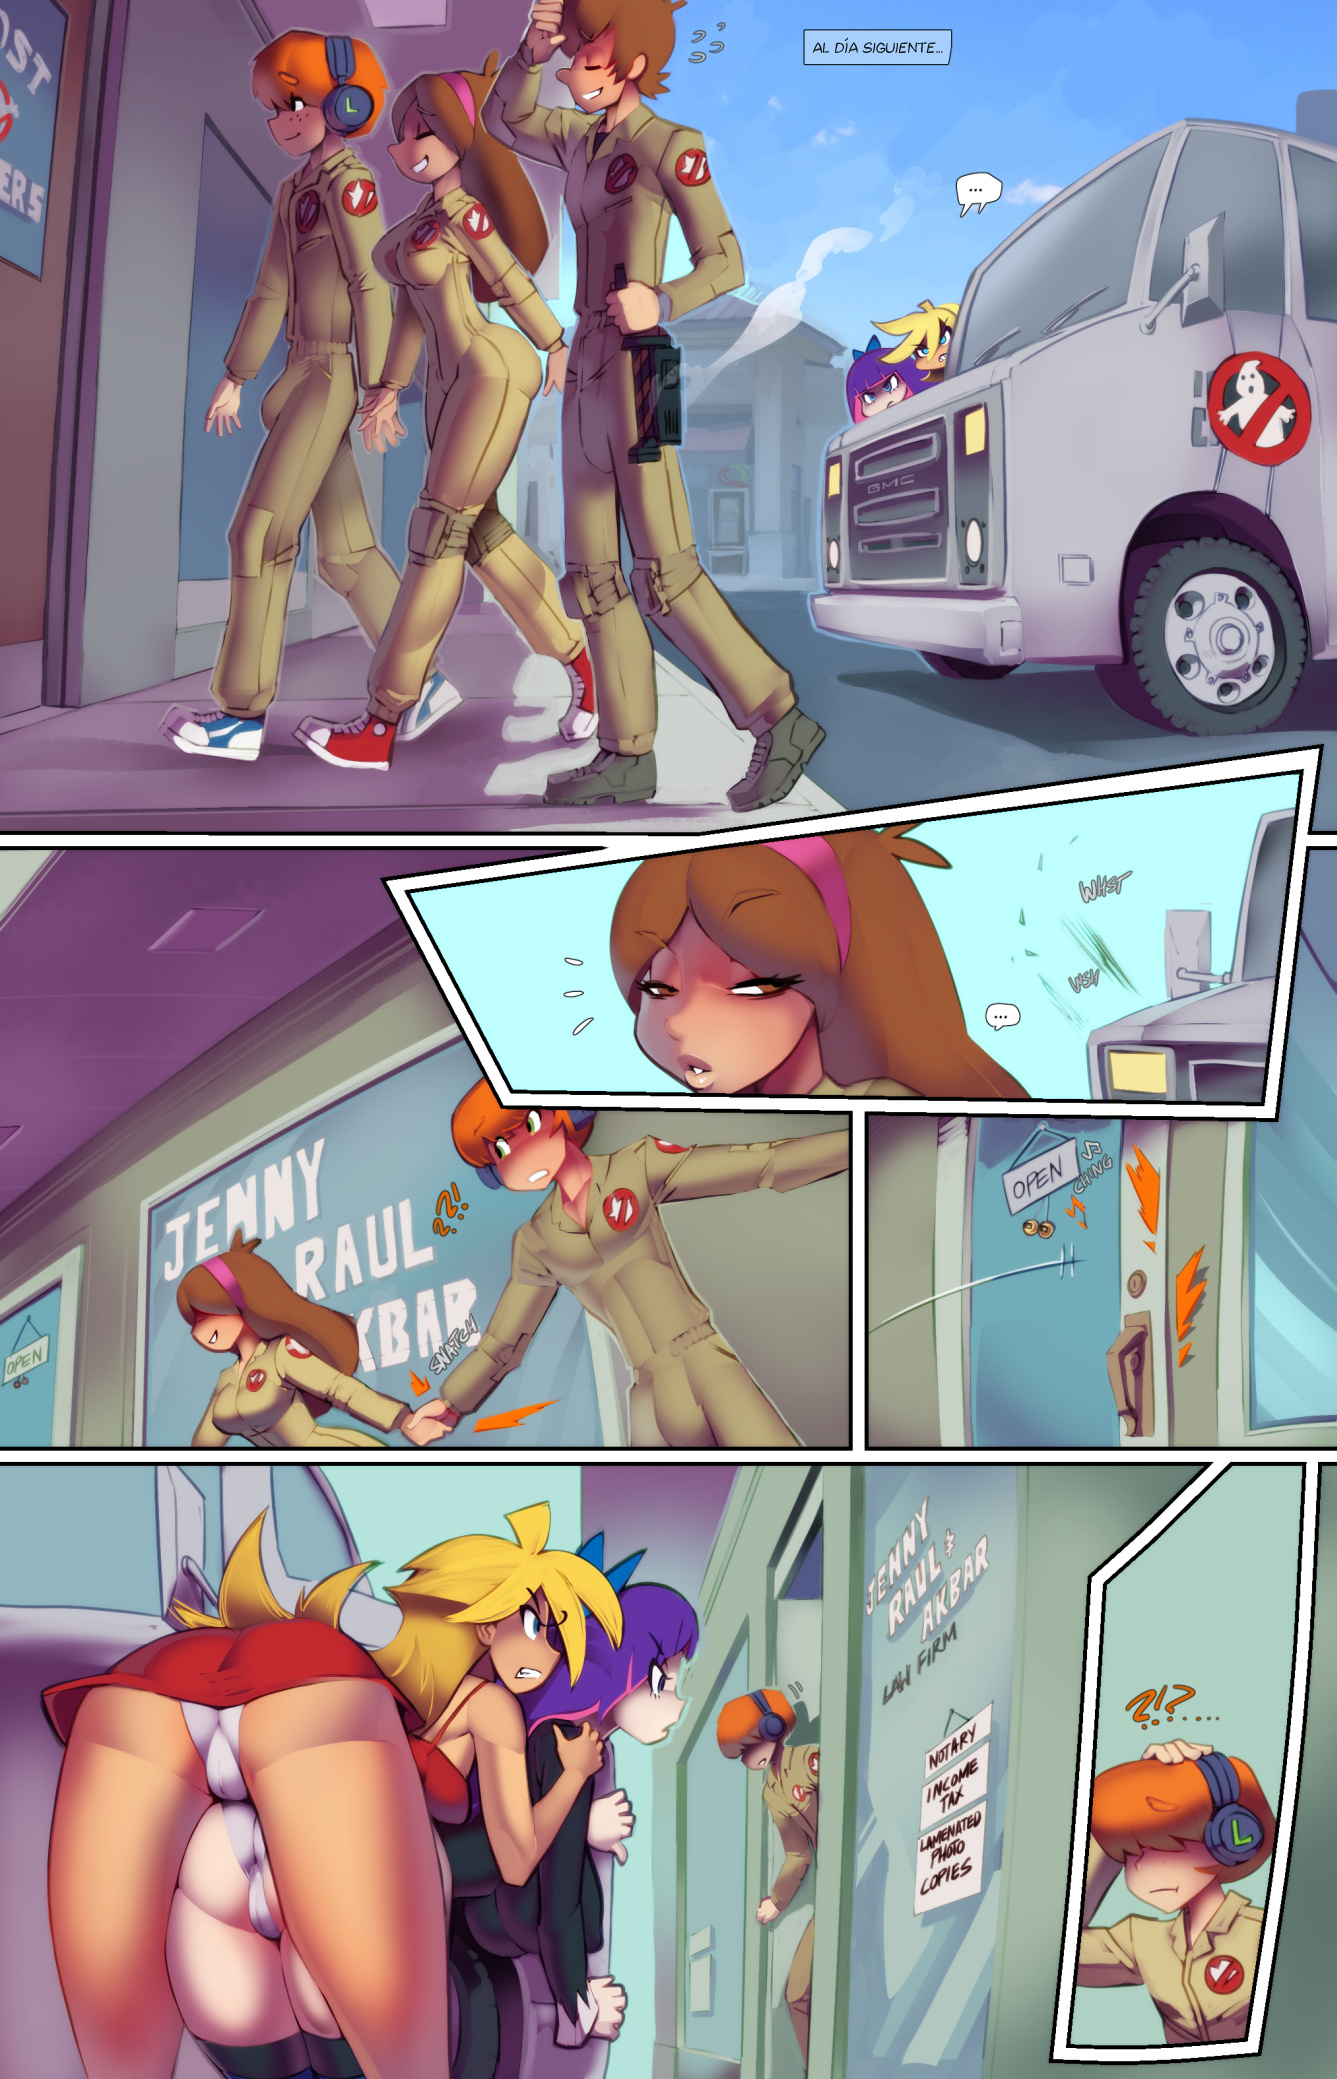 &#91;Fred Perry&#93; – Man-Panty Raid(Panty and Stocking Gravity Falls) - 1